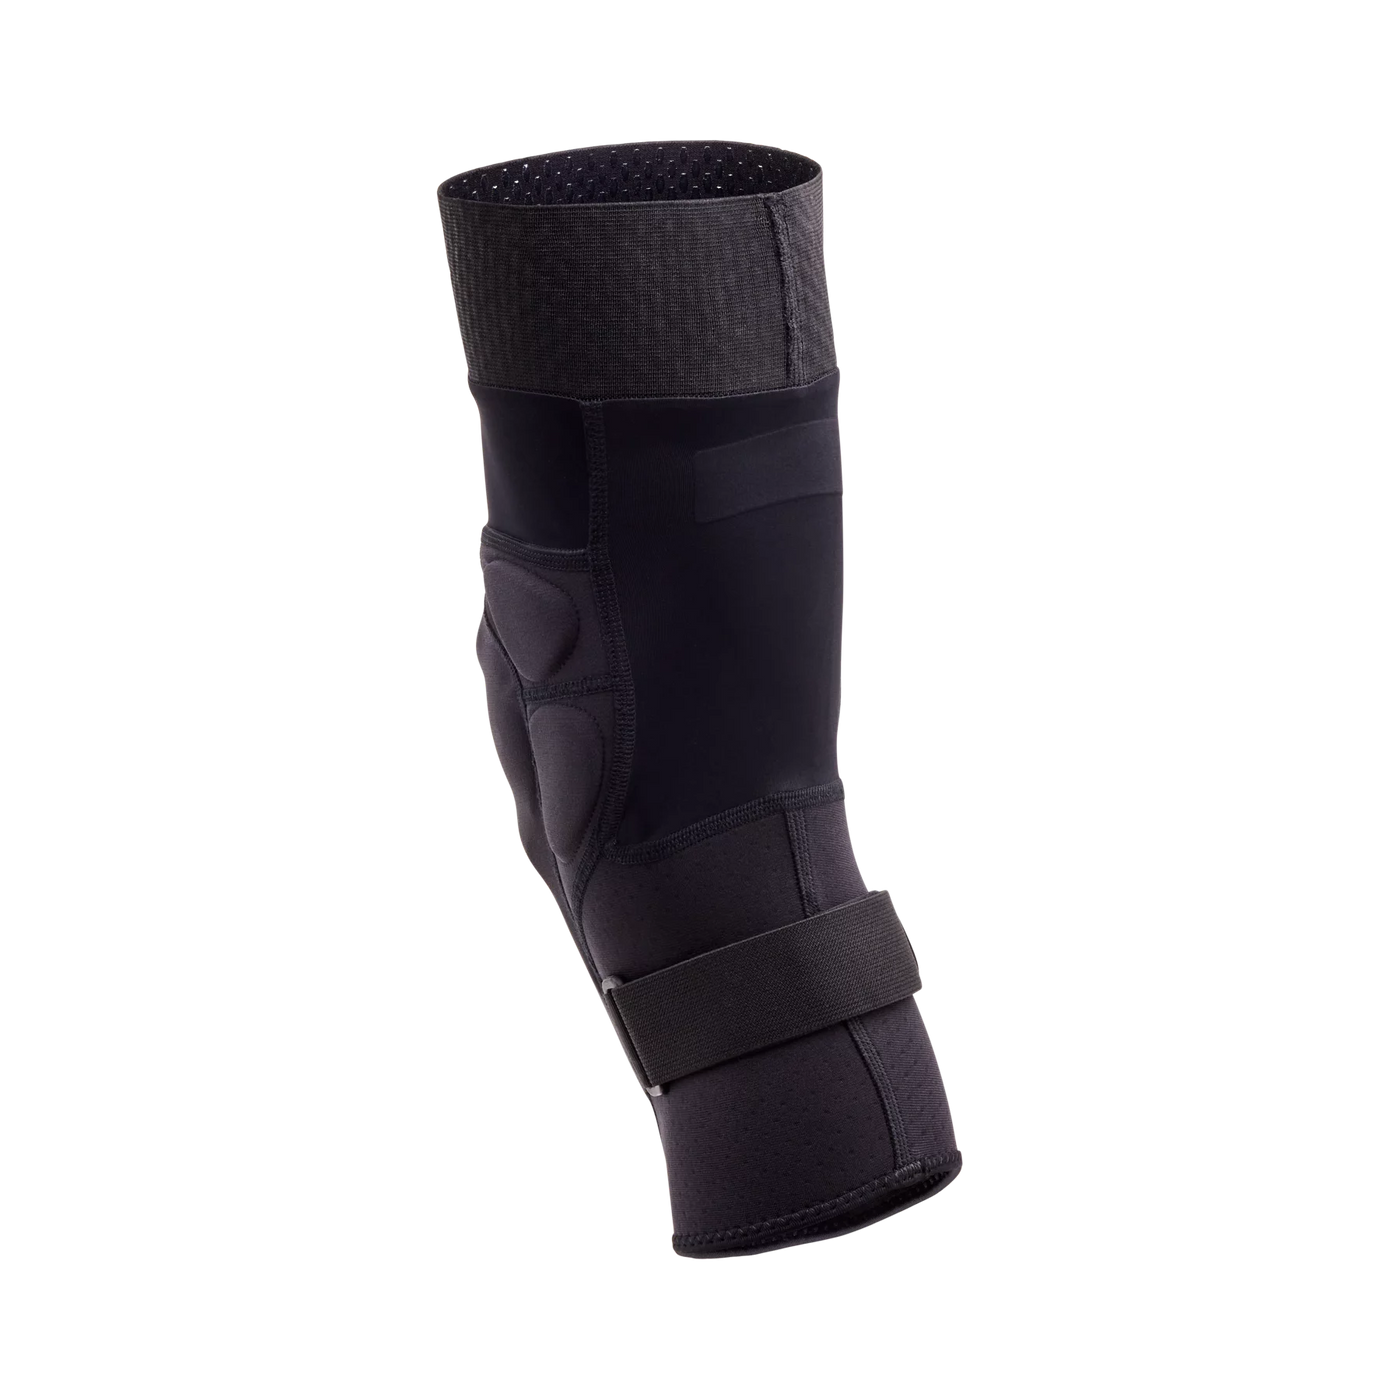 Launch Knee Guards